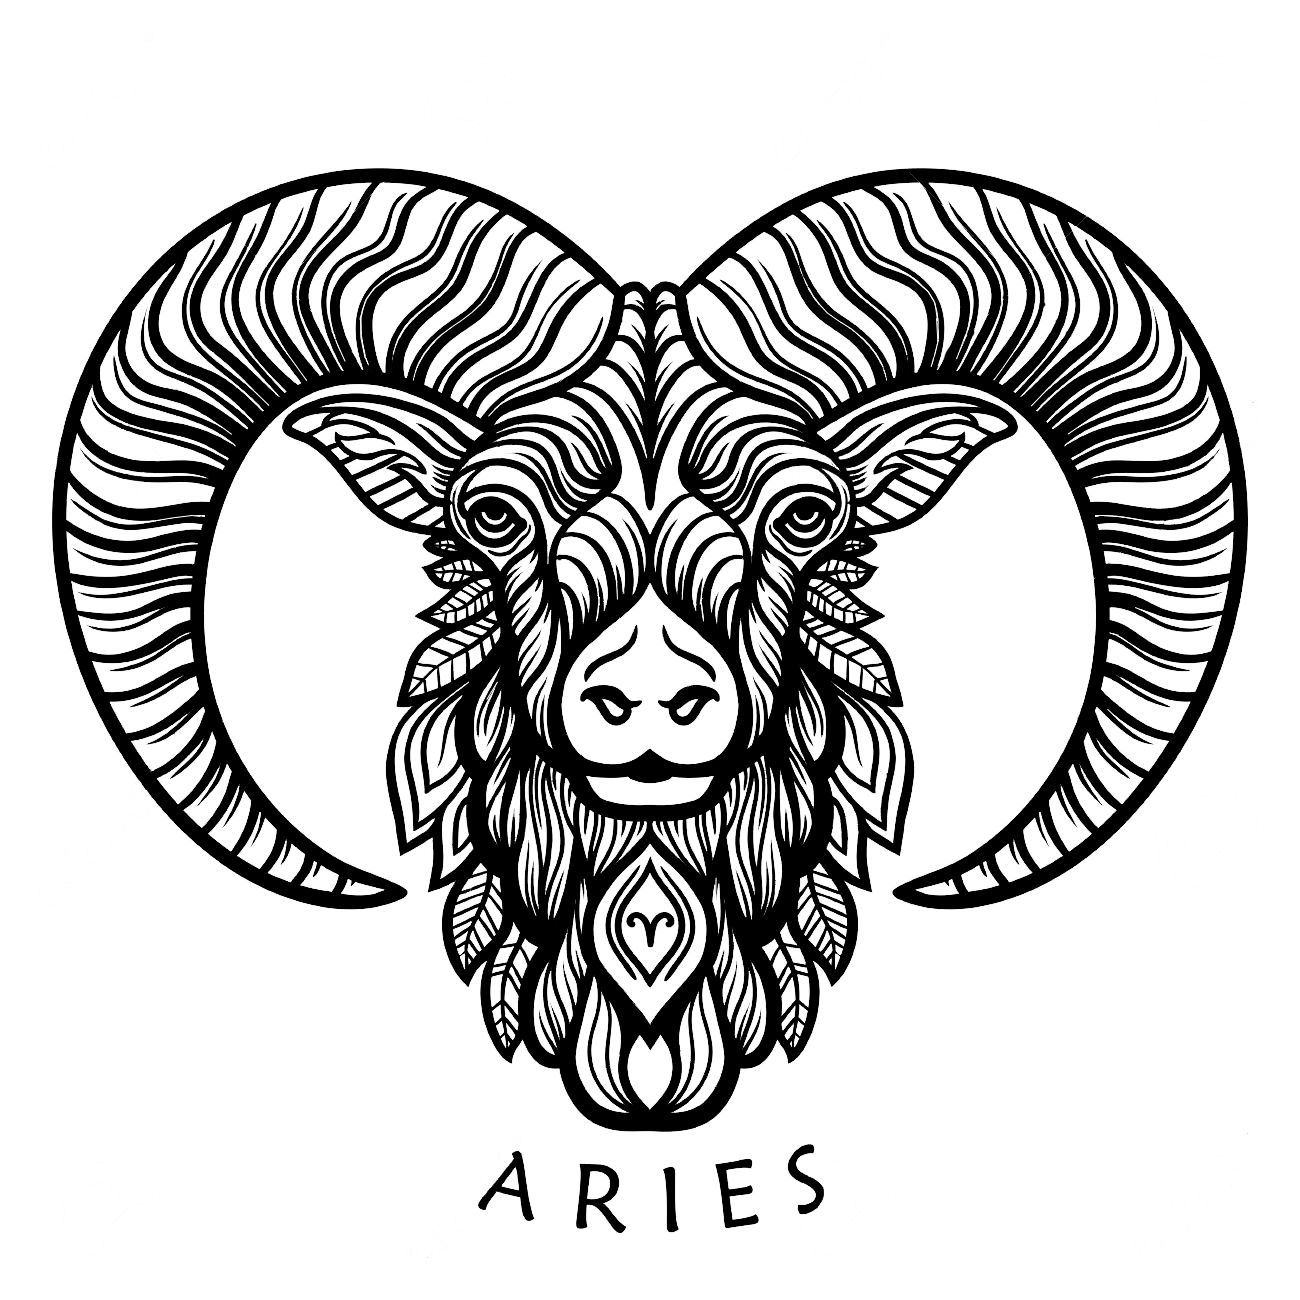 Aries Coloring Pages Pdf to Print - Aries Coloring Pages